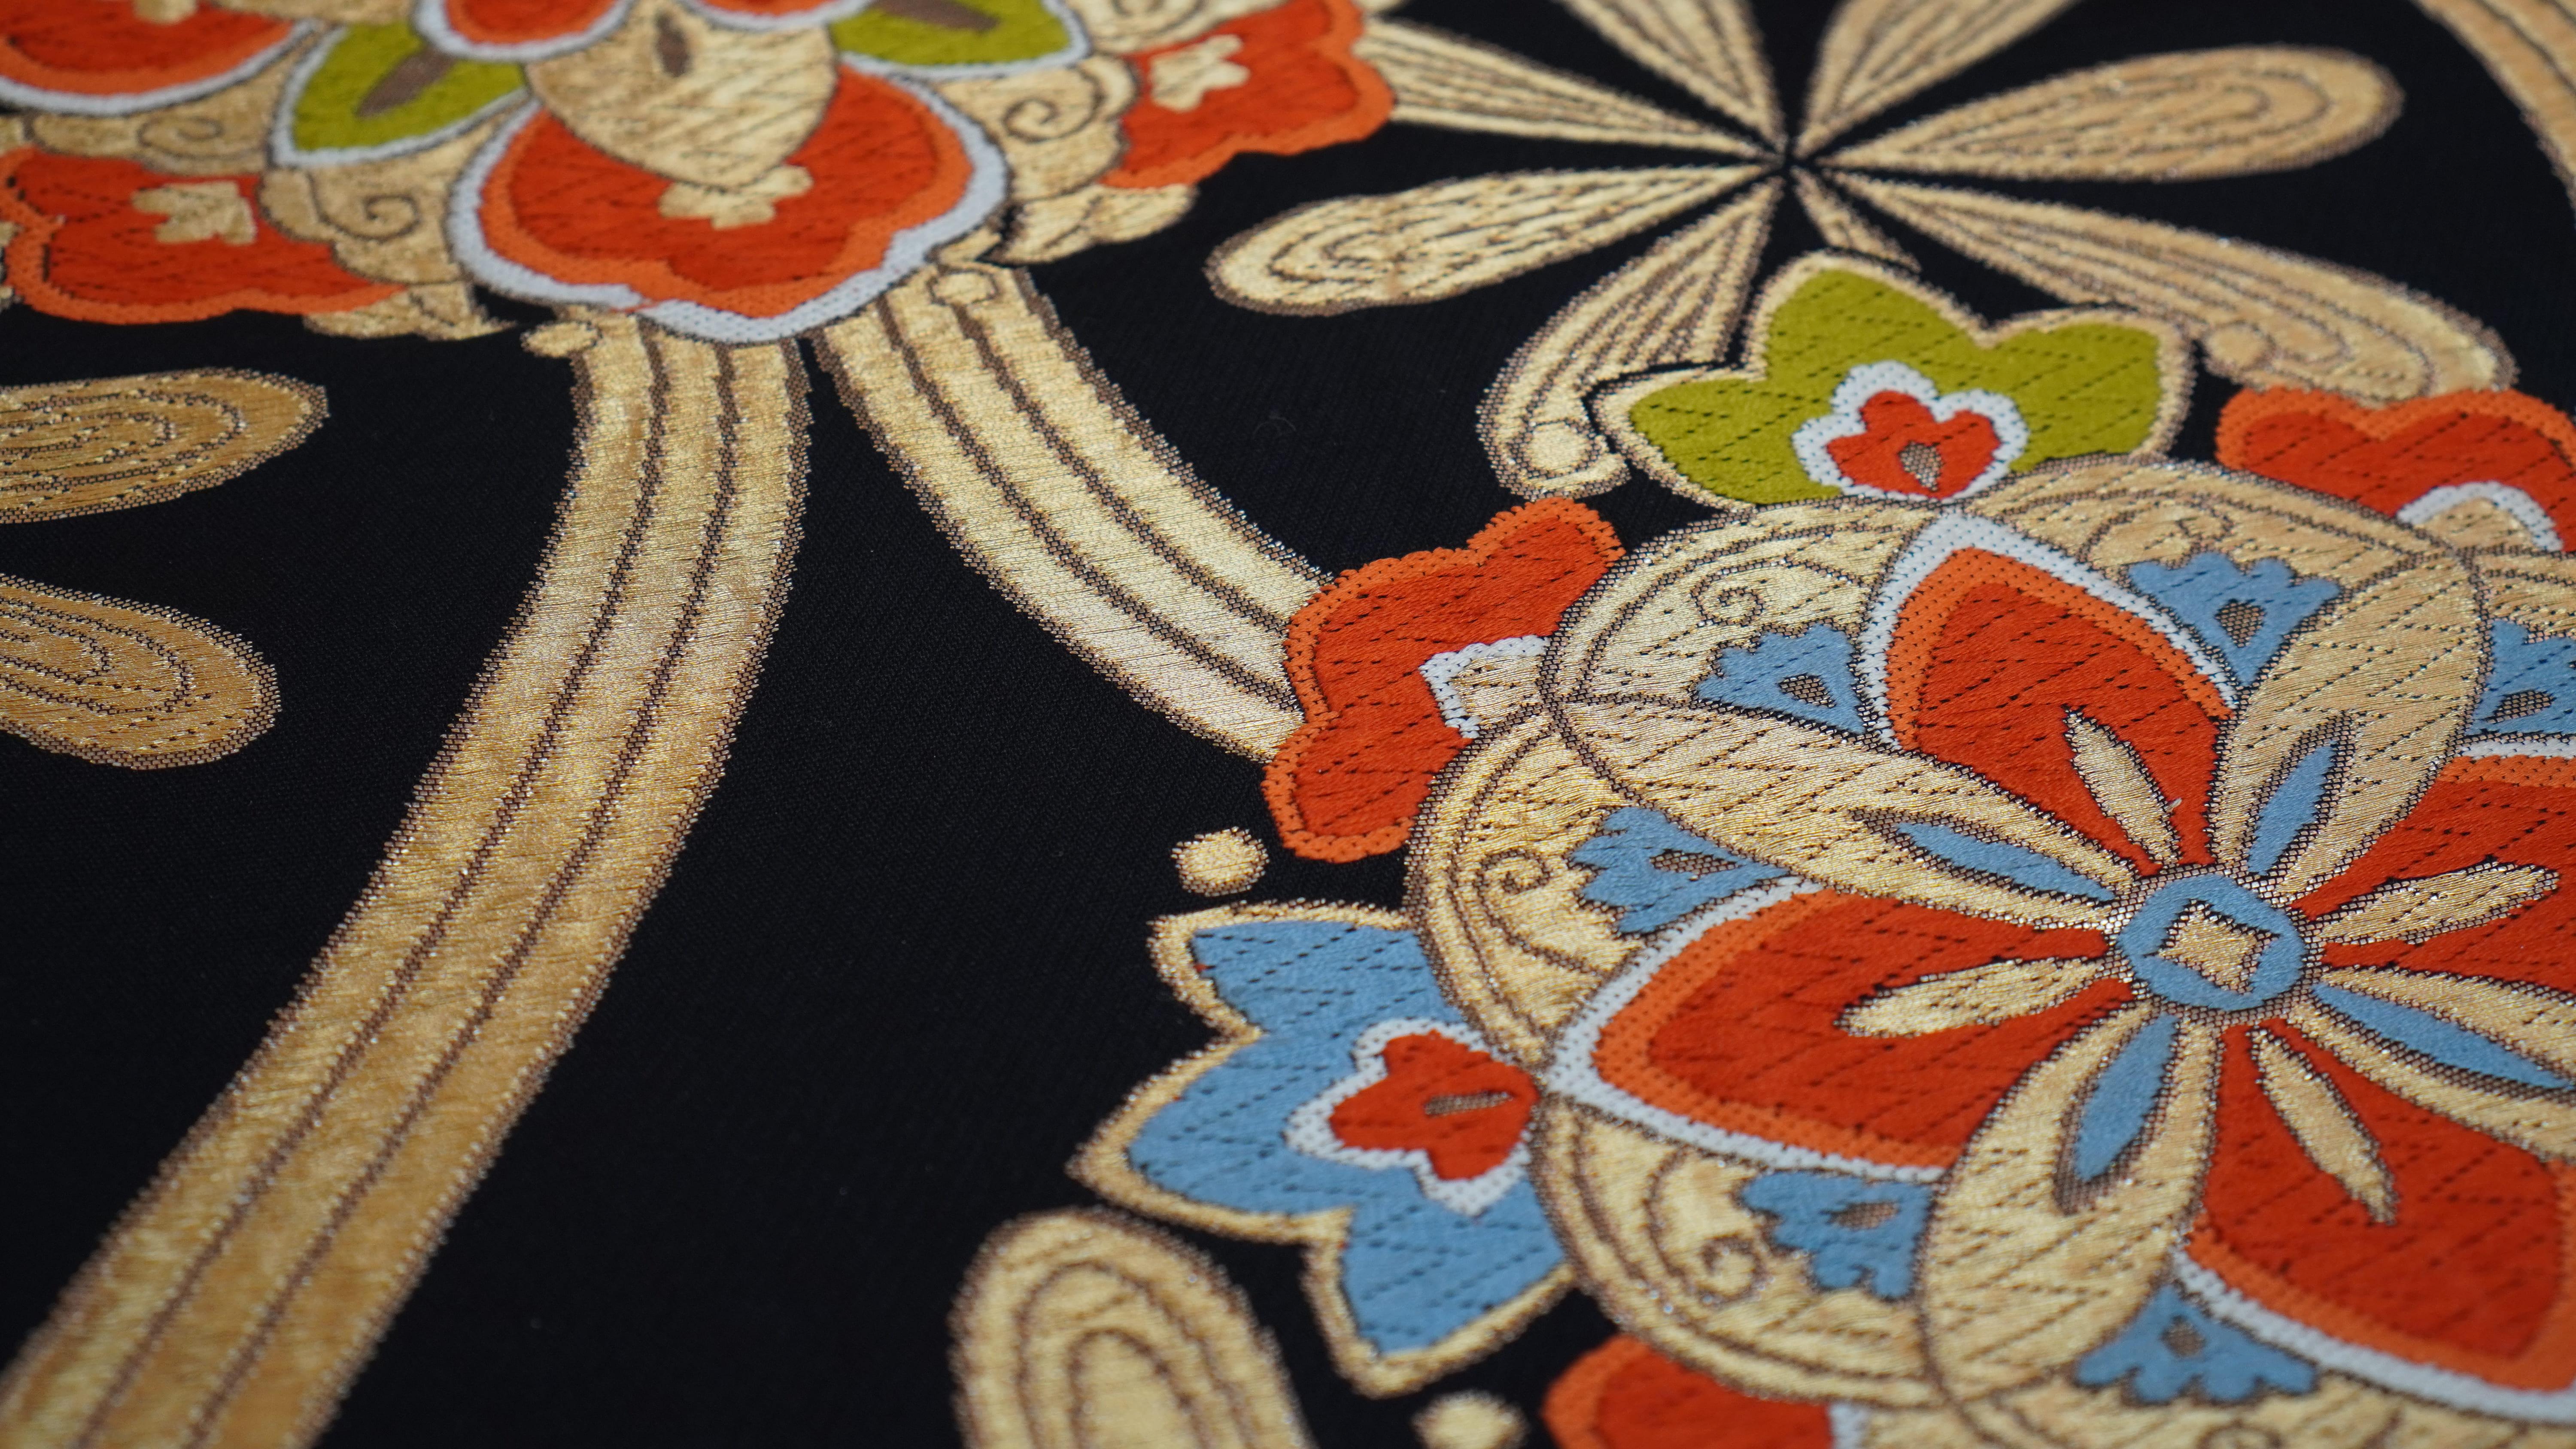 This wonderful work of art, made of venerable kimono obi, is created by skilled Japanese artisans just for you. 

 The colorful floral patterns and the curved patterns called TATE WAKU, embroidered with gold threads make this piece an impressive